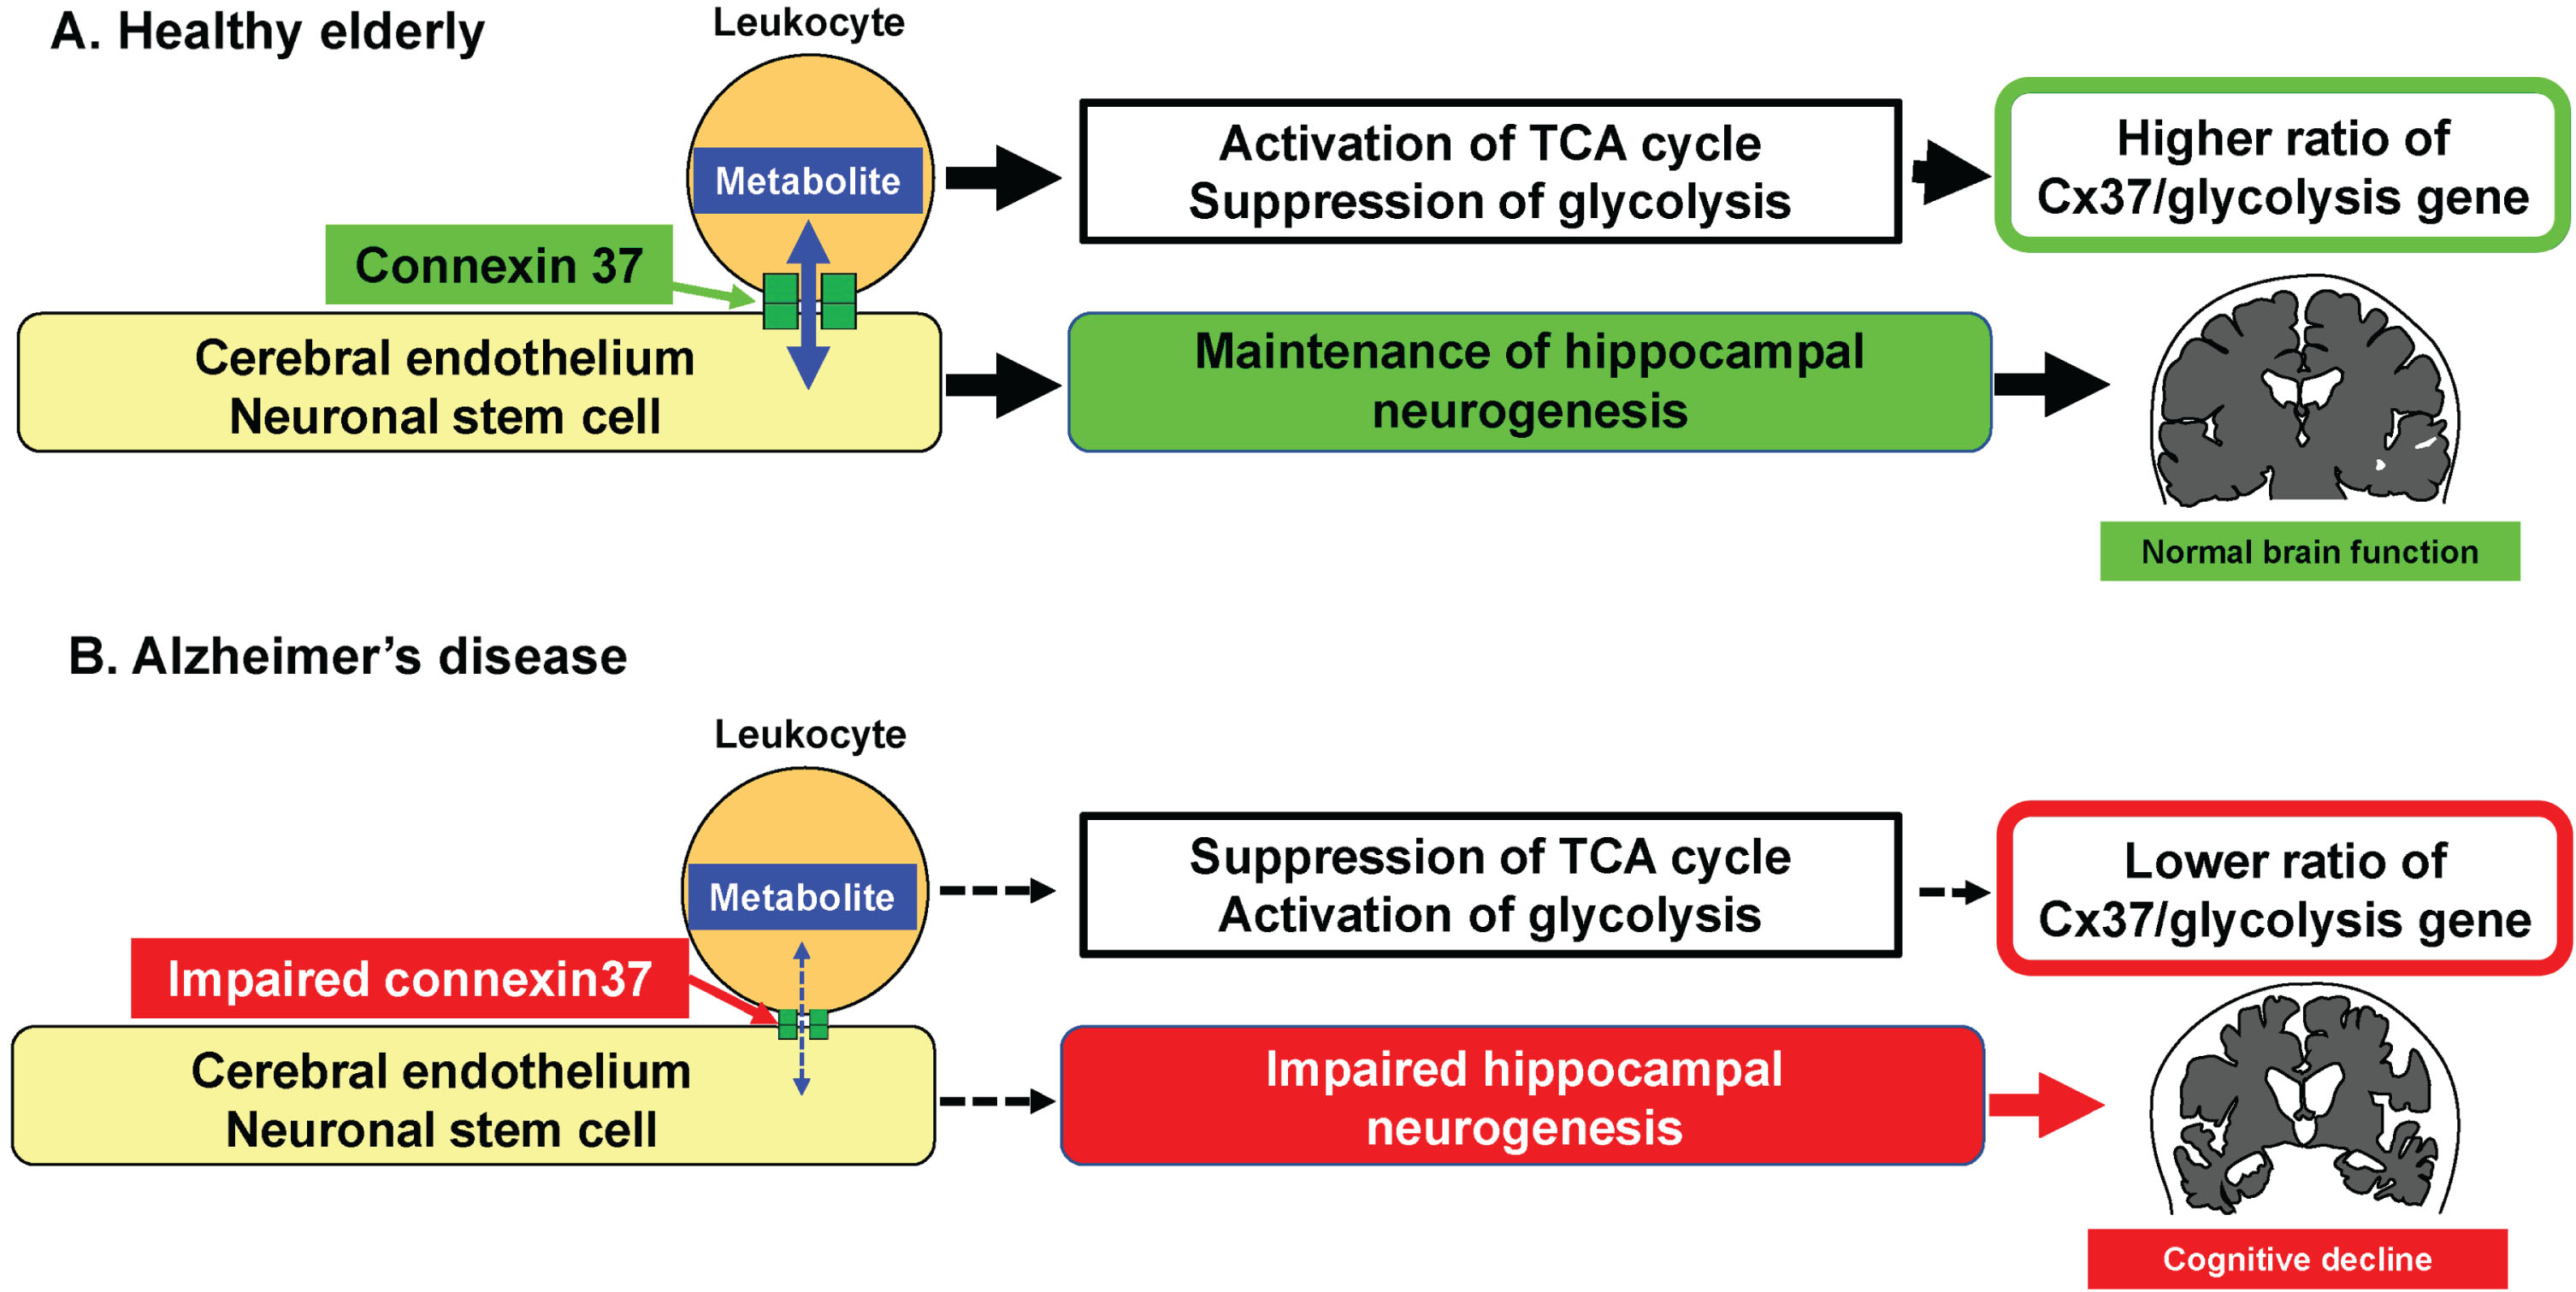 Proposed hypothesis that links circulating leukocytes and AD. A) In healthy elderly, the physiological cellular interaction between circulating leukocytes and endothelium/neuronal stem cell via Cx37 contributes towards the maintenance of hippocampal neurogenesis. B) In patients with AD, the impairment of physiological cellular interaction between circulating leukocytes and endothelium/neuronal stem cell via Cx37 induces impaired neurogenesis with lower ratio of Cx37/PHD3 gene.